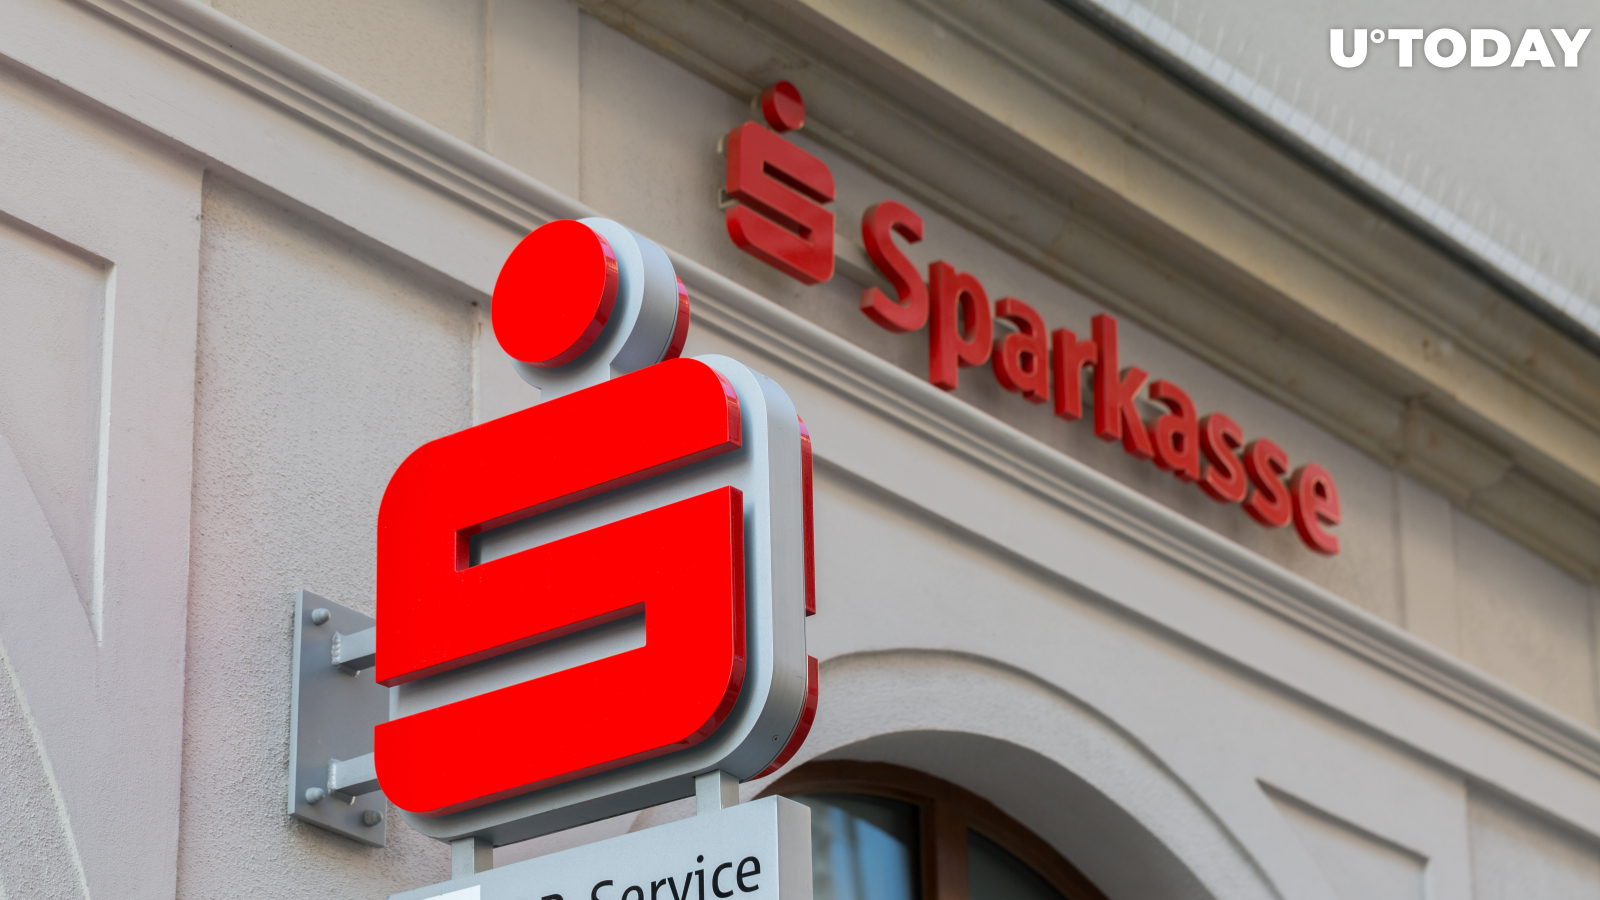 Germany's Largest Savings Bank to Give 50 Million People Exposure to Bitcoin